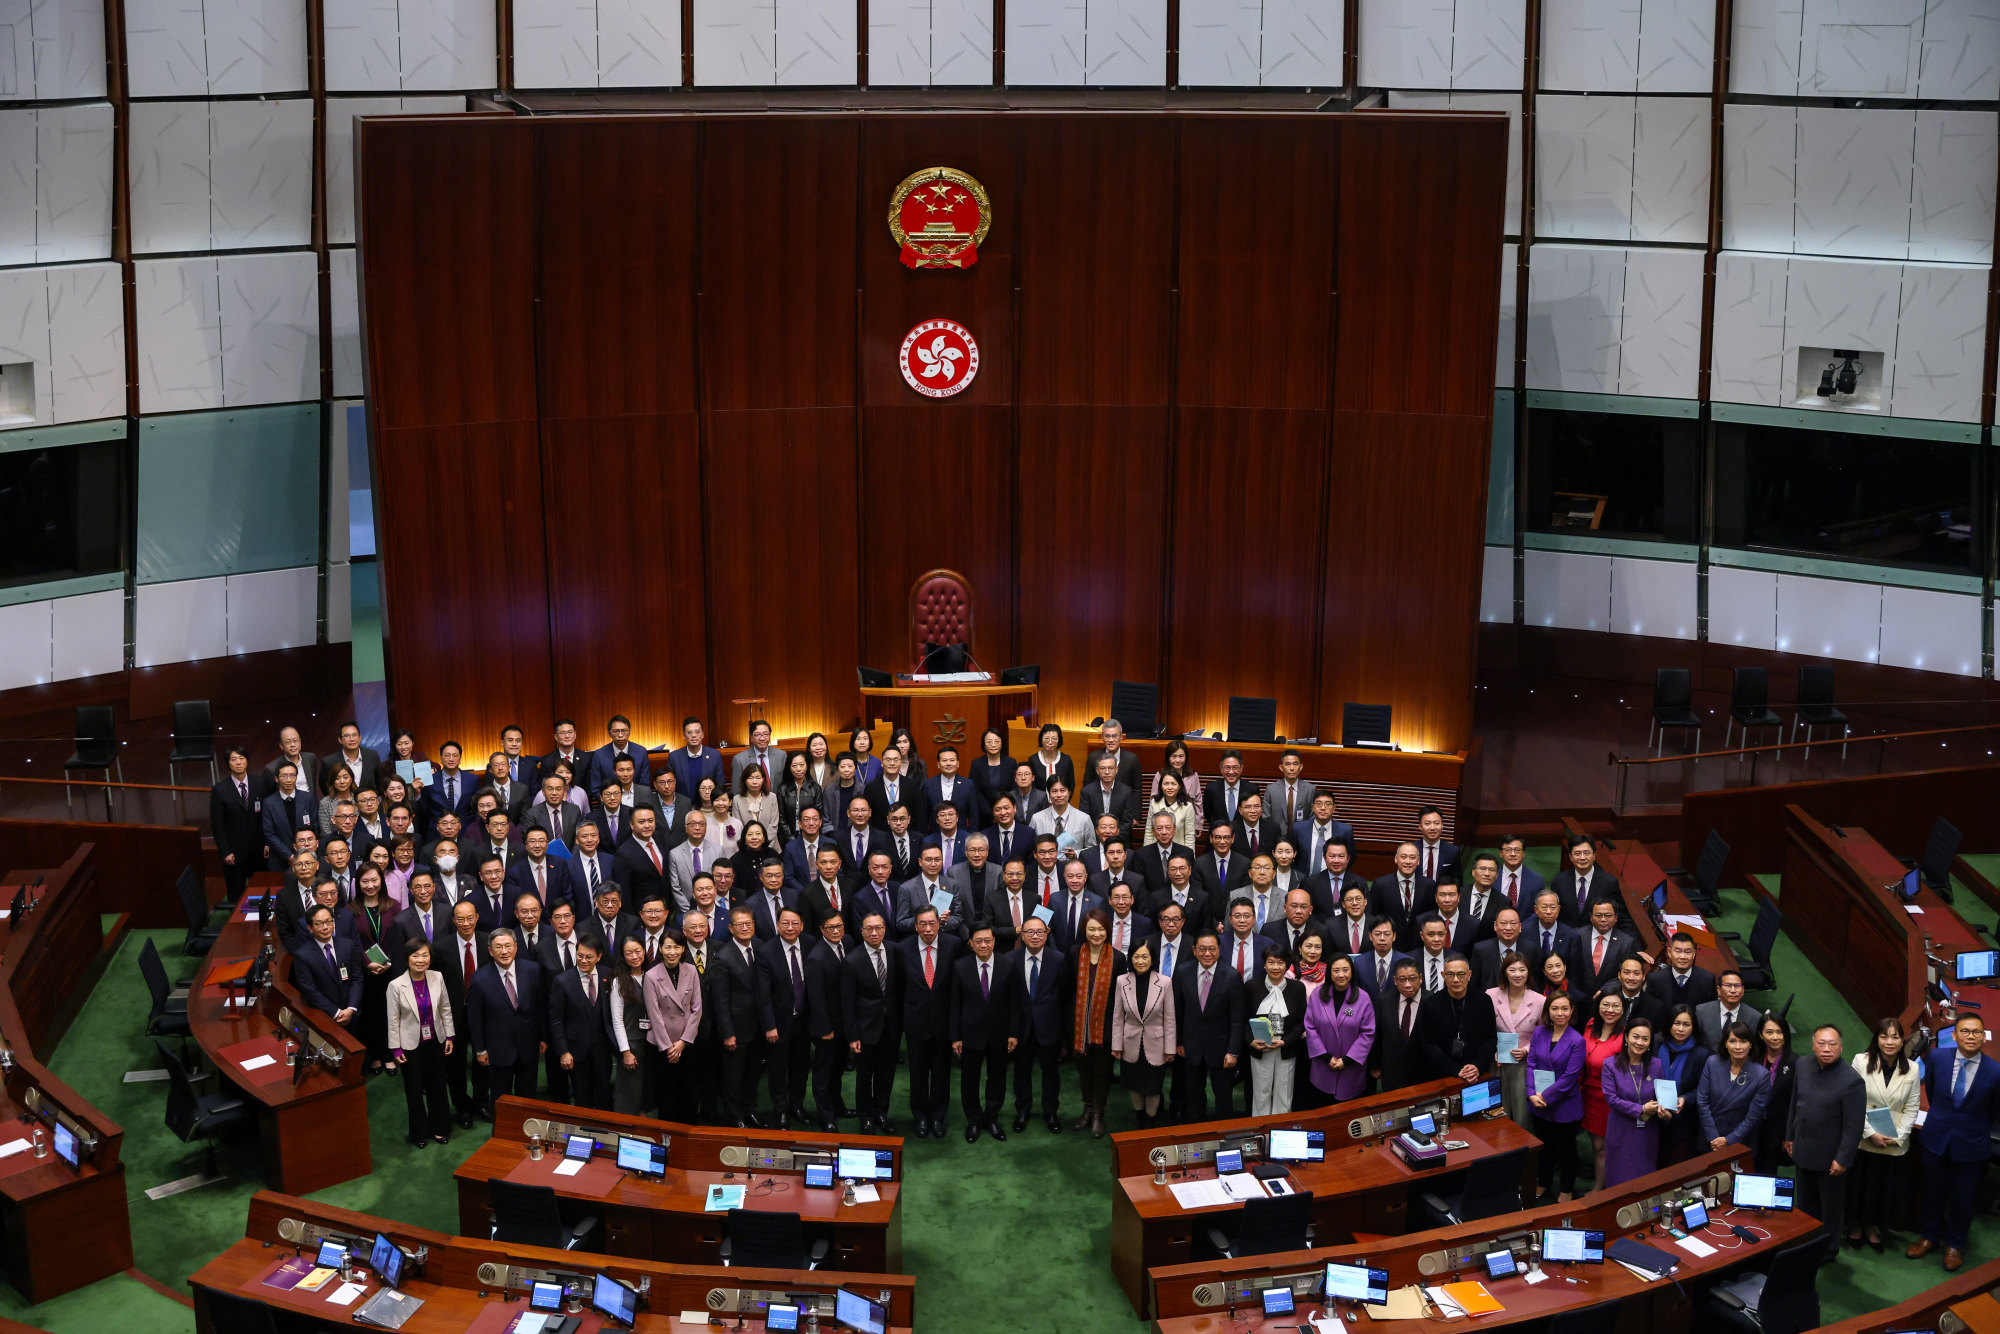 Lawmakers and government officials pose in Legco after a marathon session to pass the Article 23 legislation. Photo: Yik Yeung-man